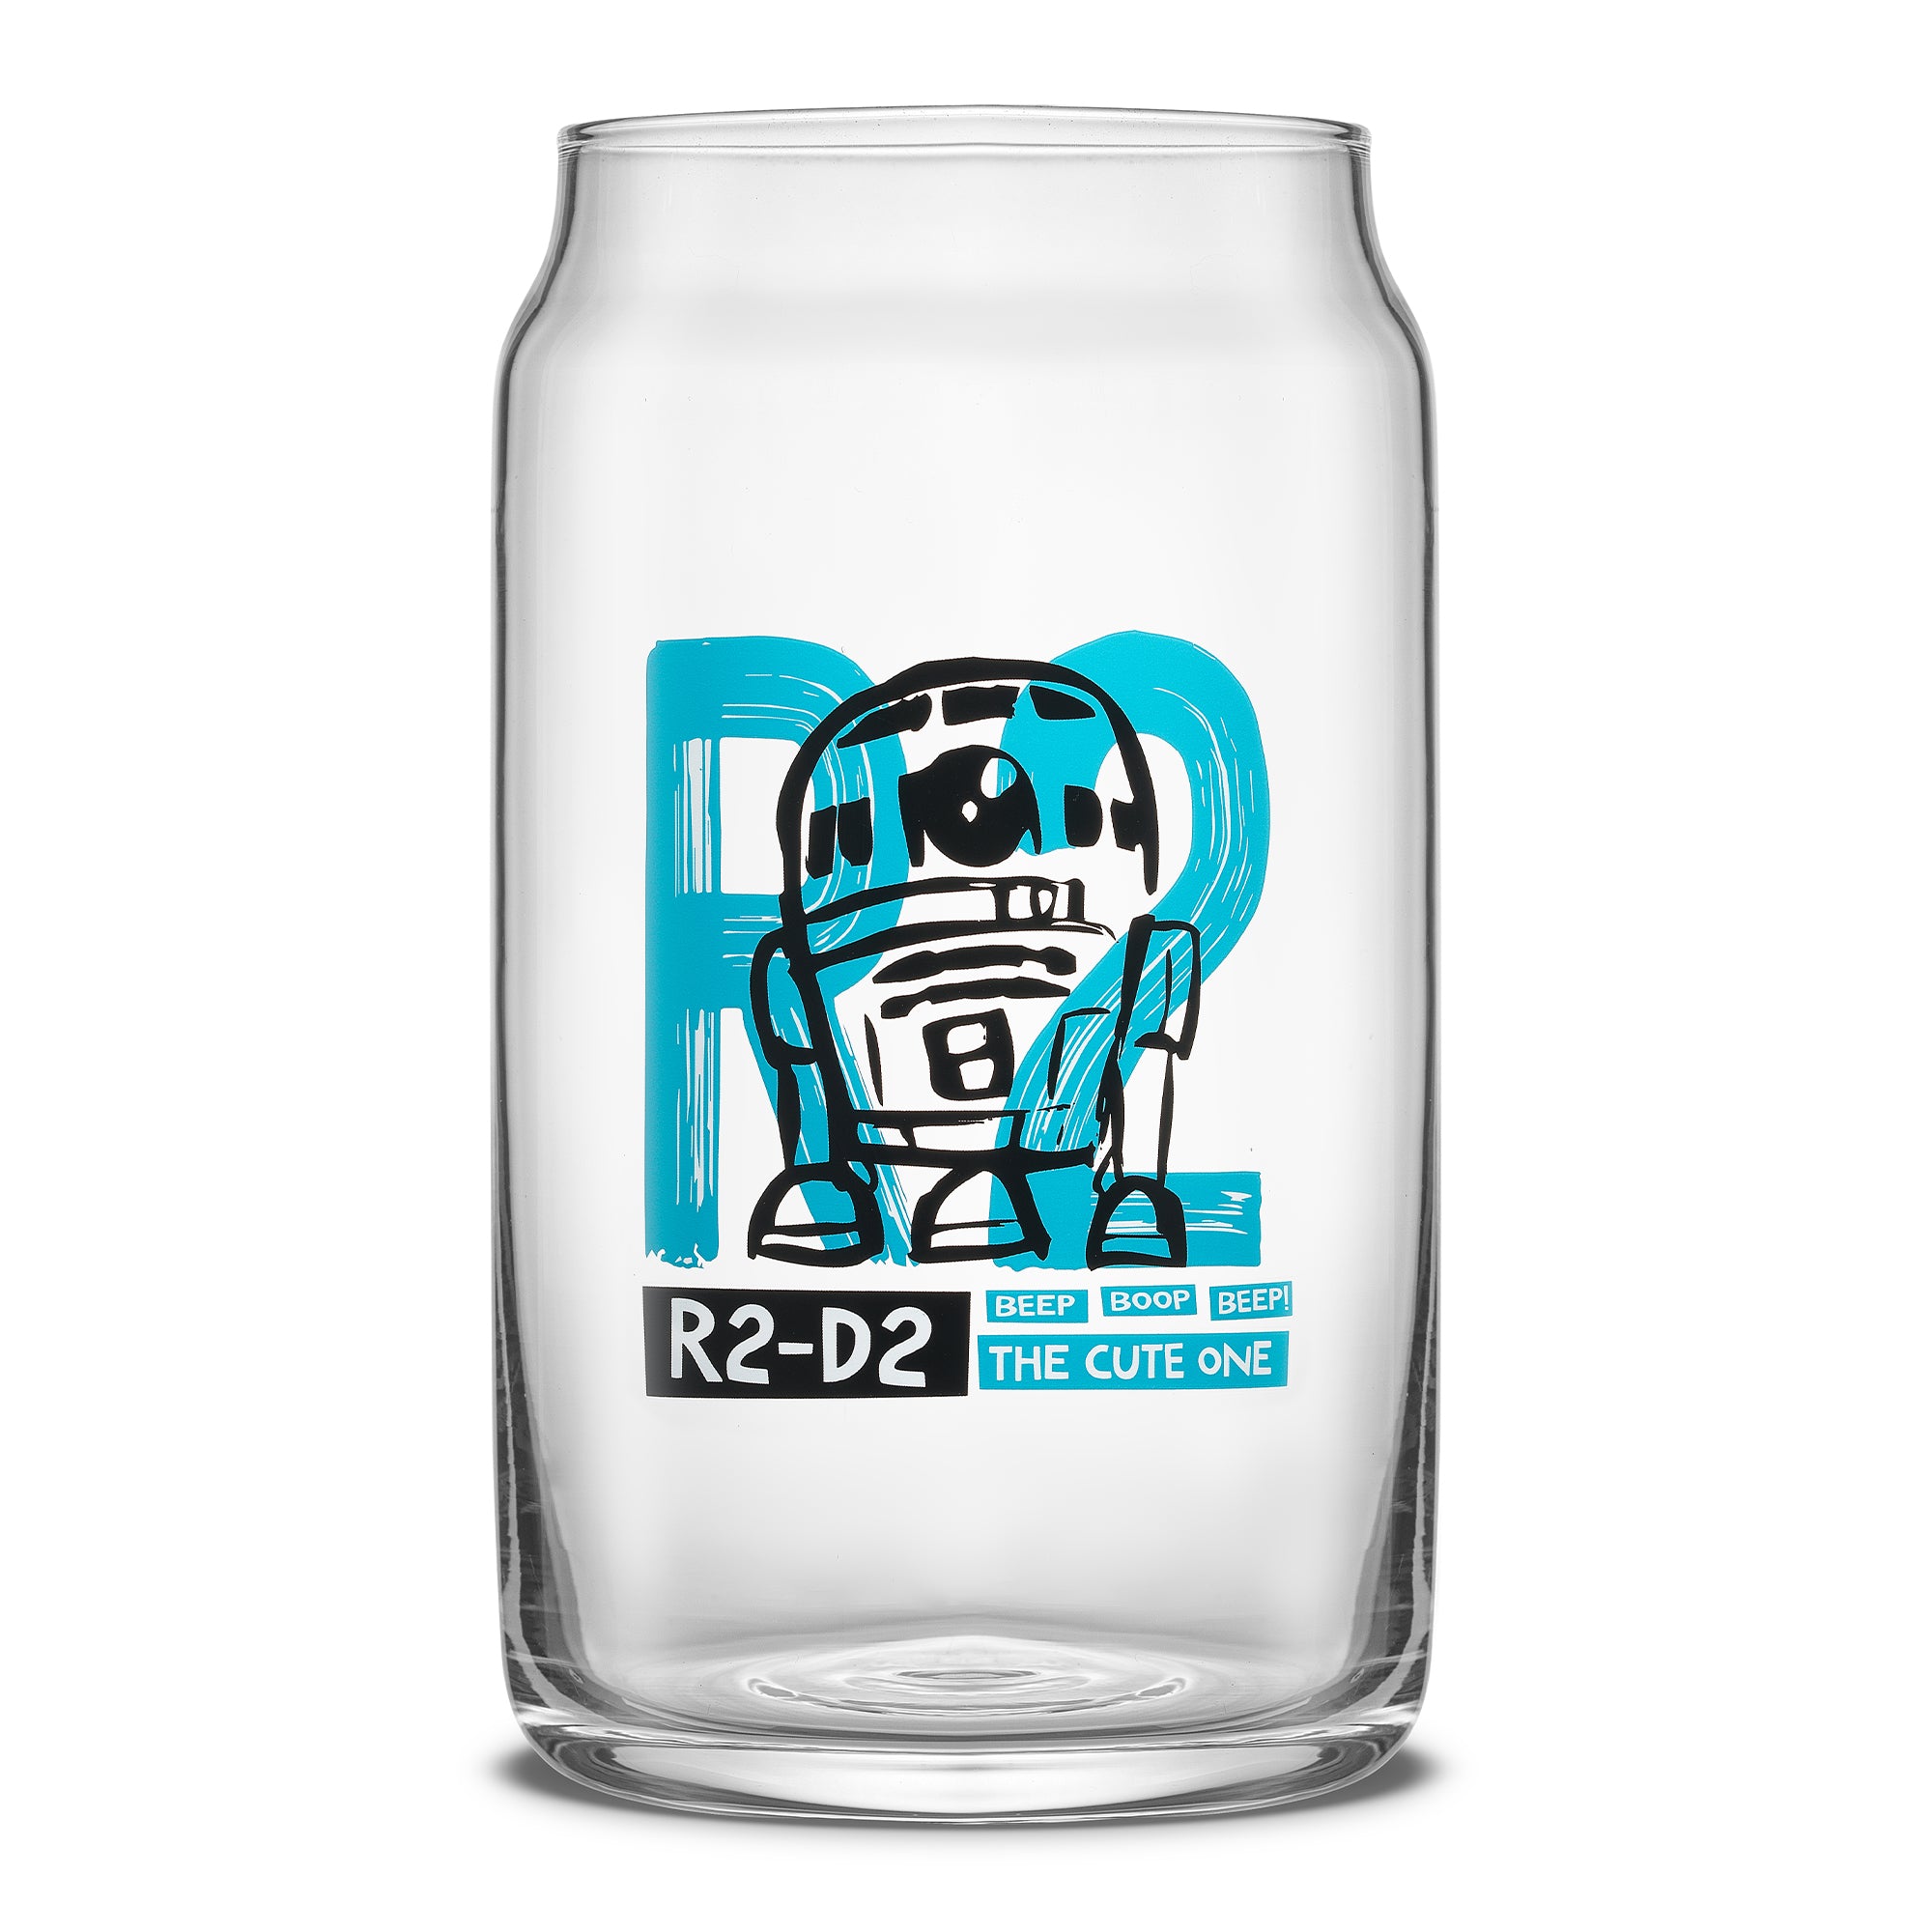 JoyJolt's Star Wars 'Now Playing' glass tumbler set, a must-have addition to any fan's drinkware collection. Featuring Darth R2-D2.